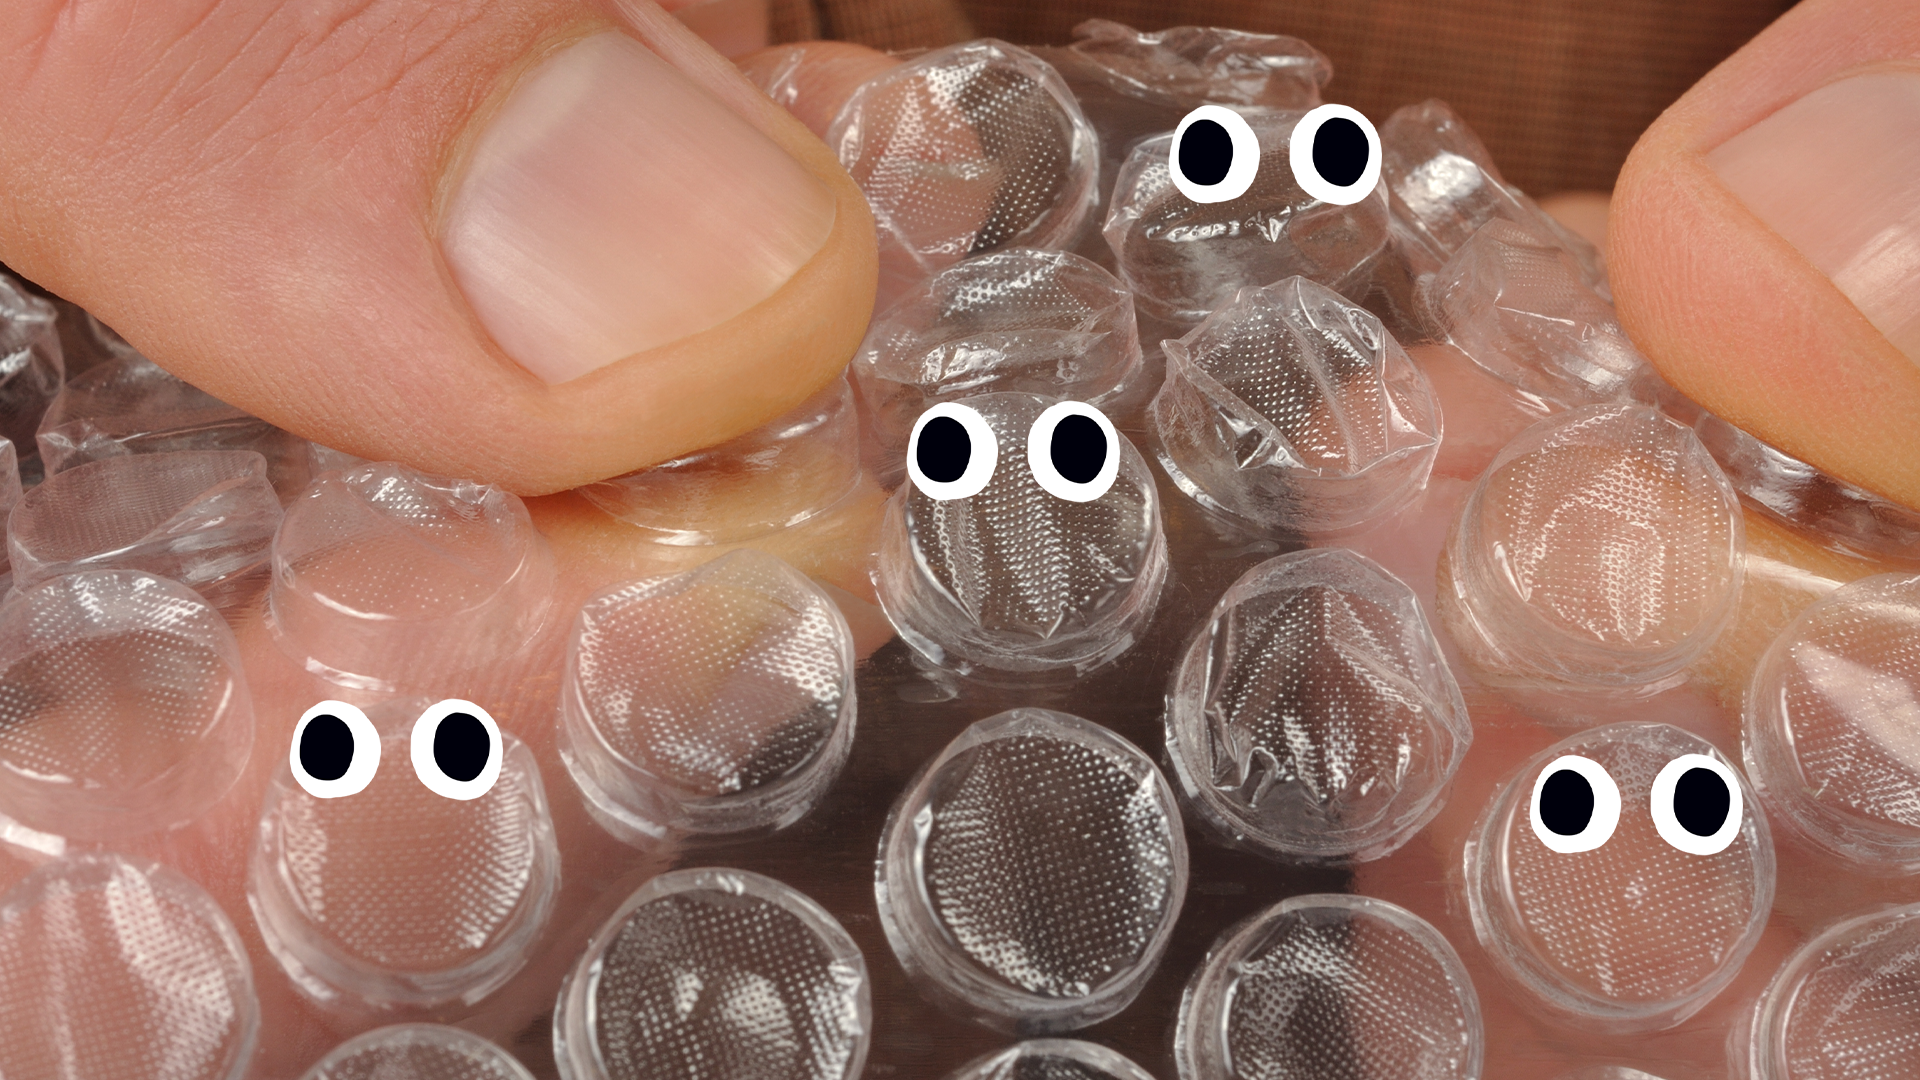 Fingers popping bubblewrap with eyes